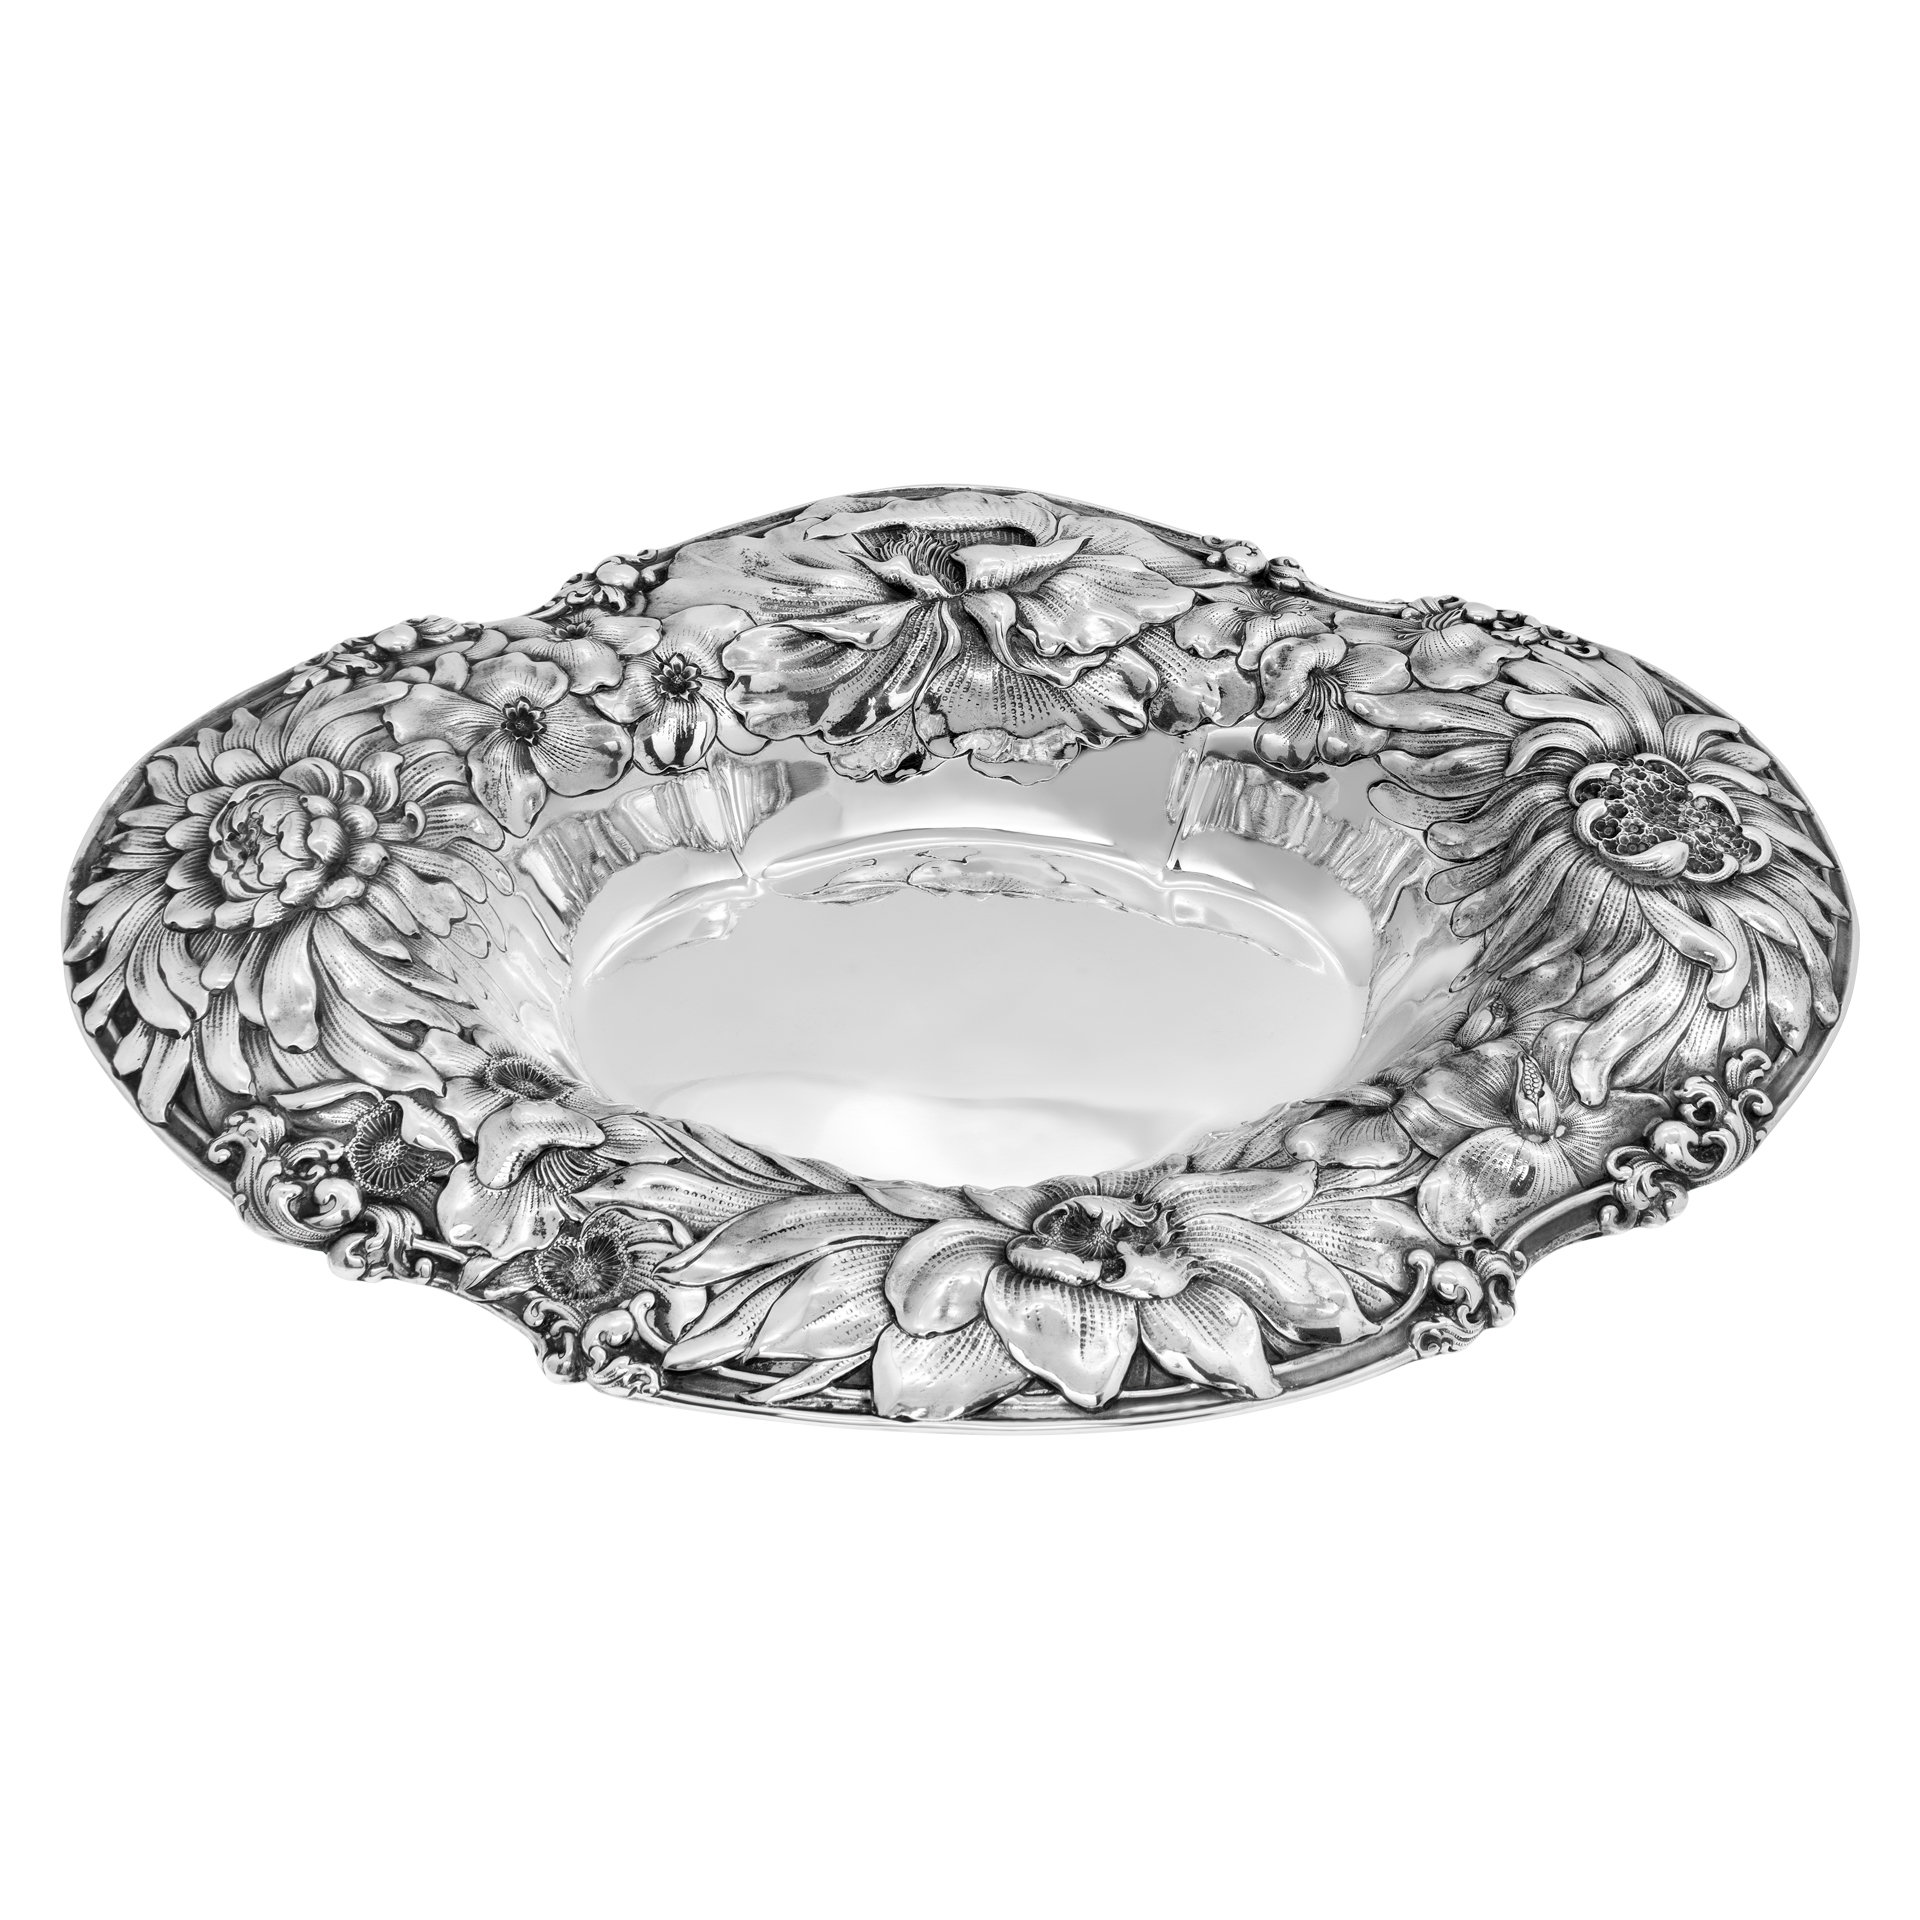 Antique IMPERIAL CHRYSANTHEMUM sterling silver oval bowl centerpiece, patented in 1894 by Gorham. image 1